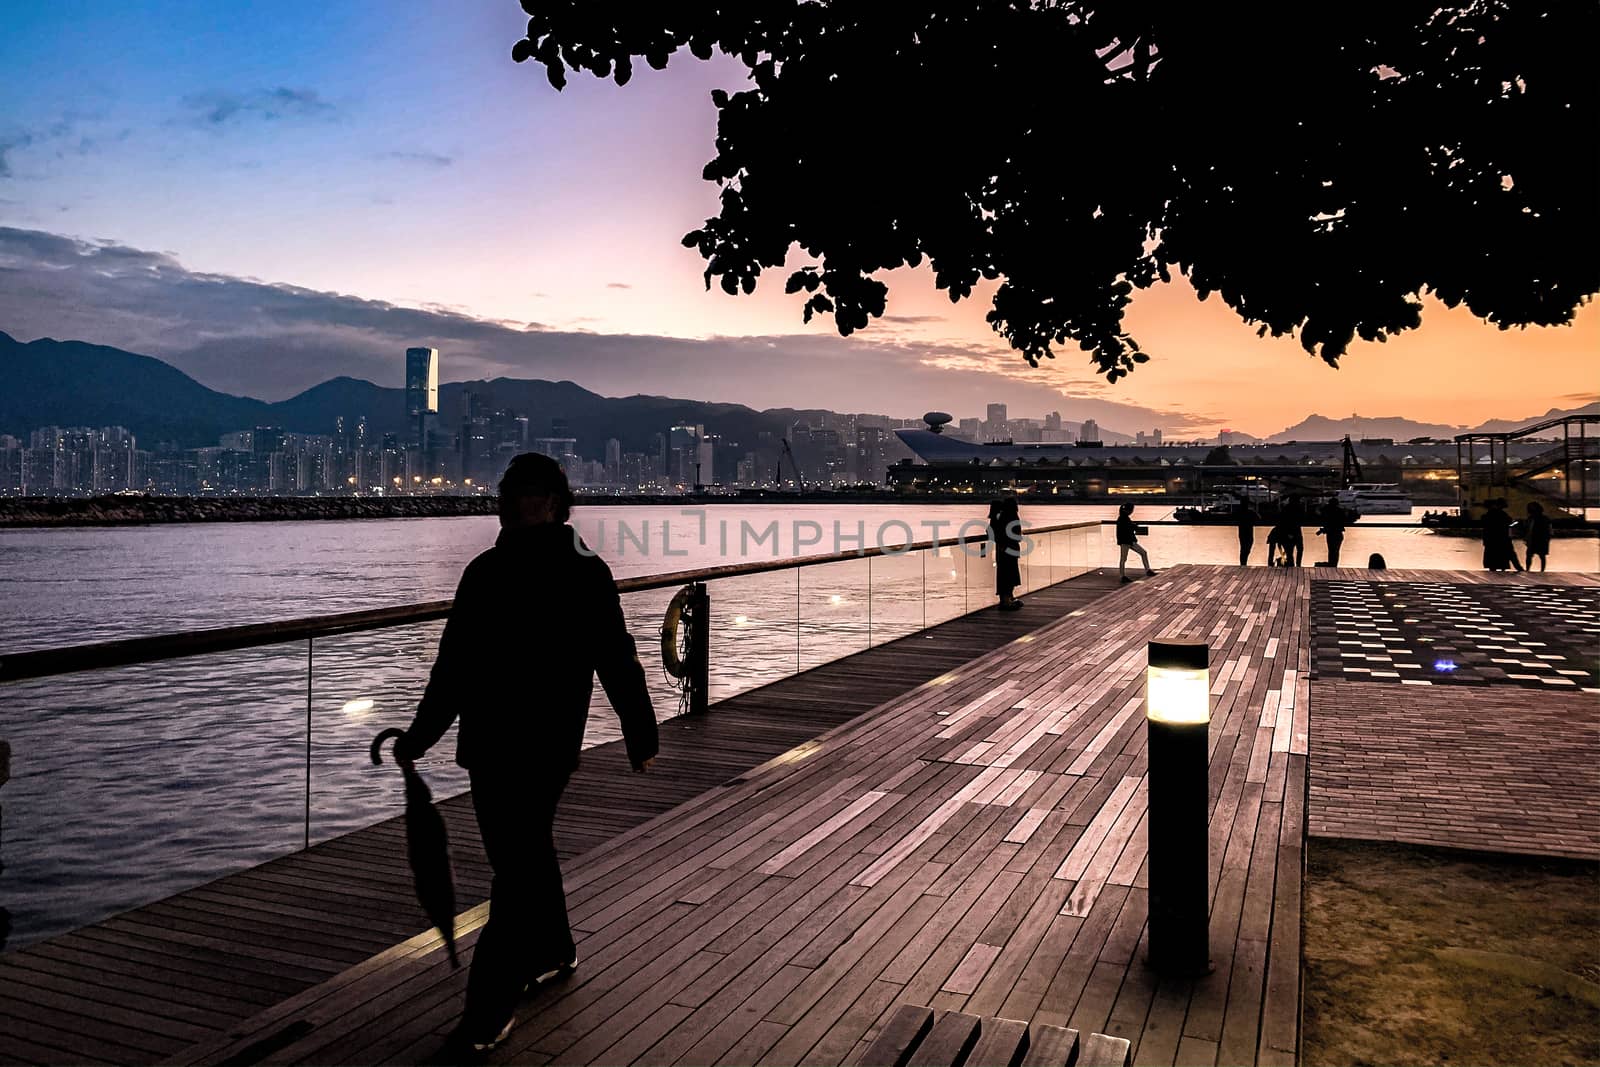 Silhouette of people and tree near the Hong Kong river in downto by cougarsan